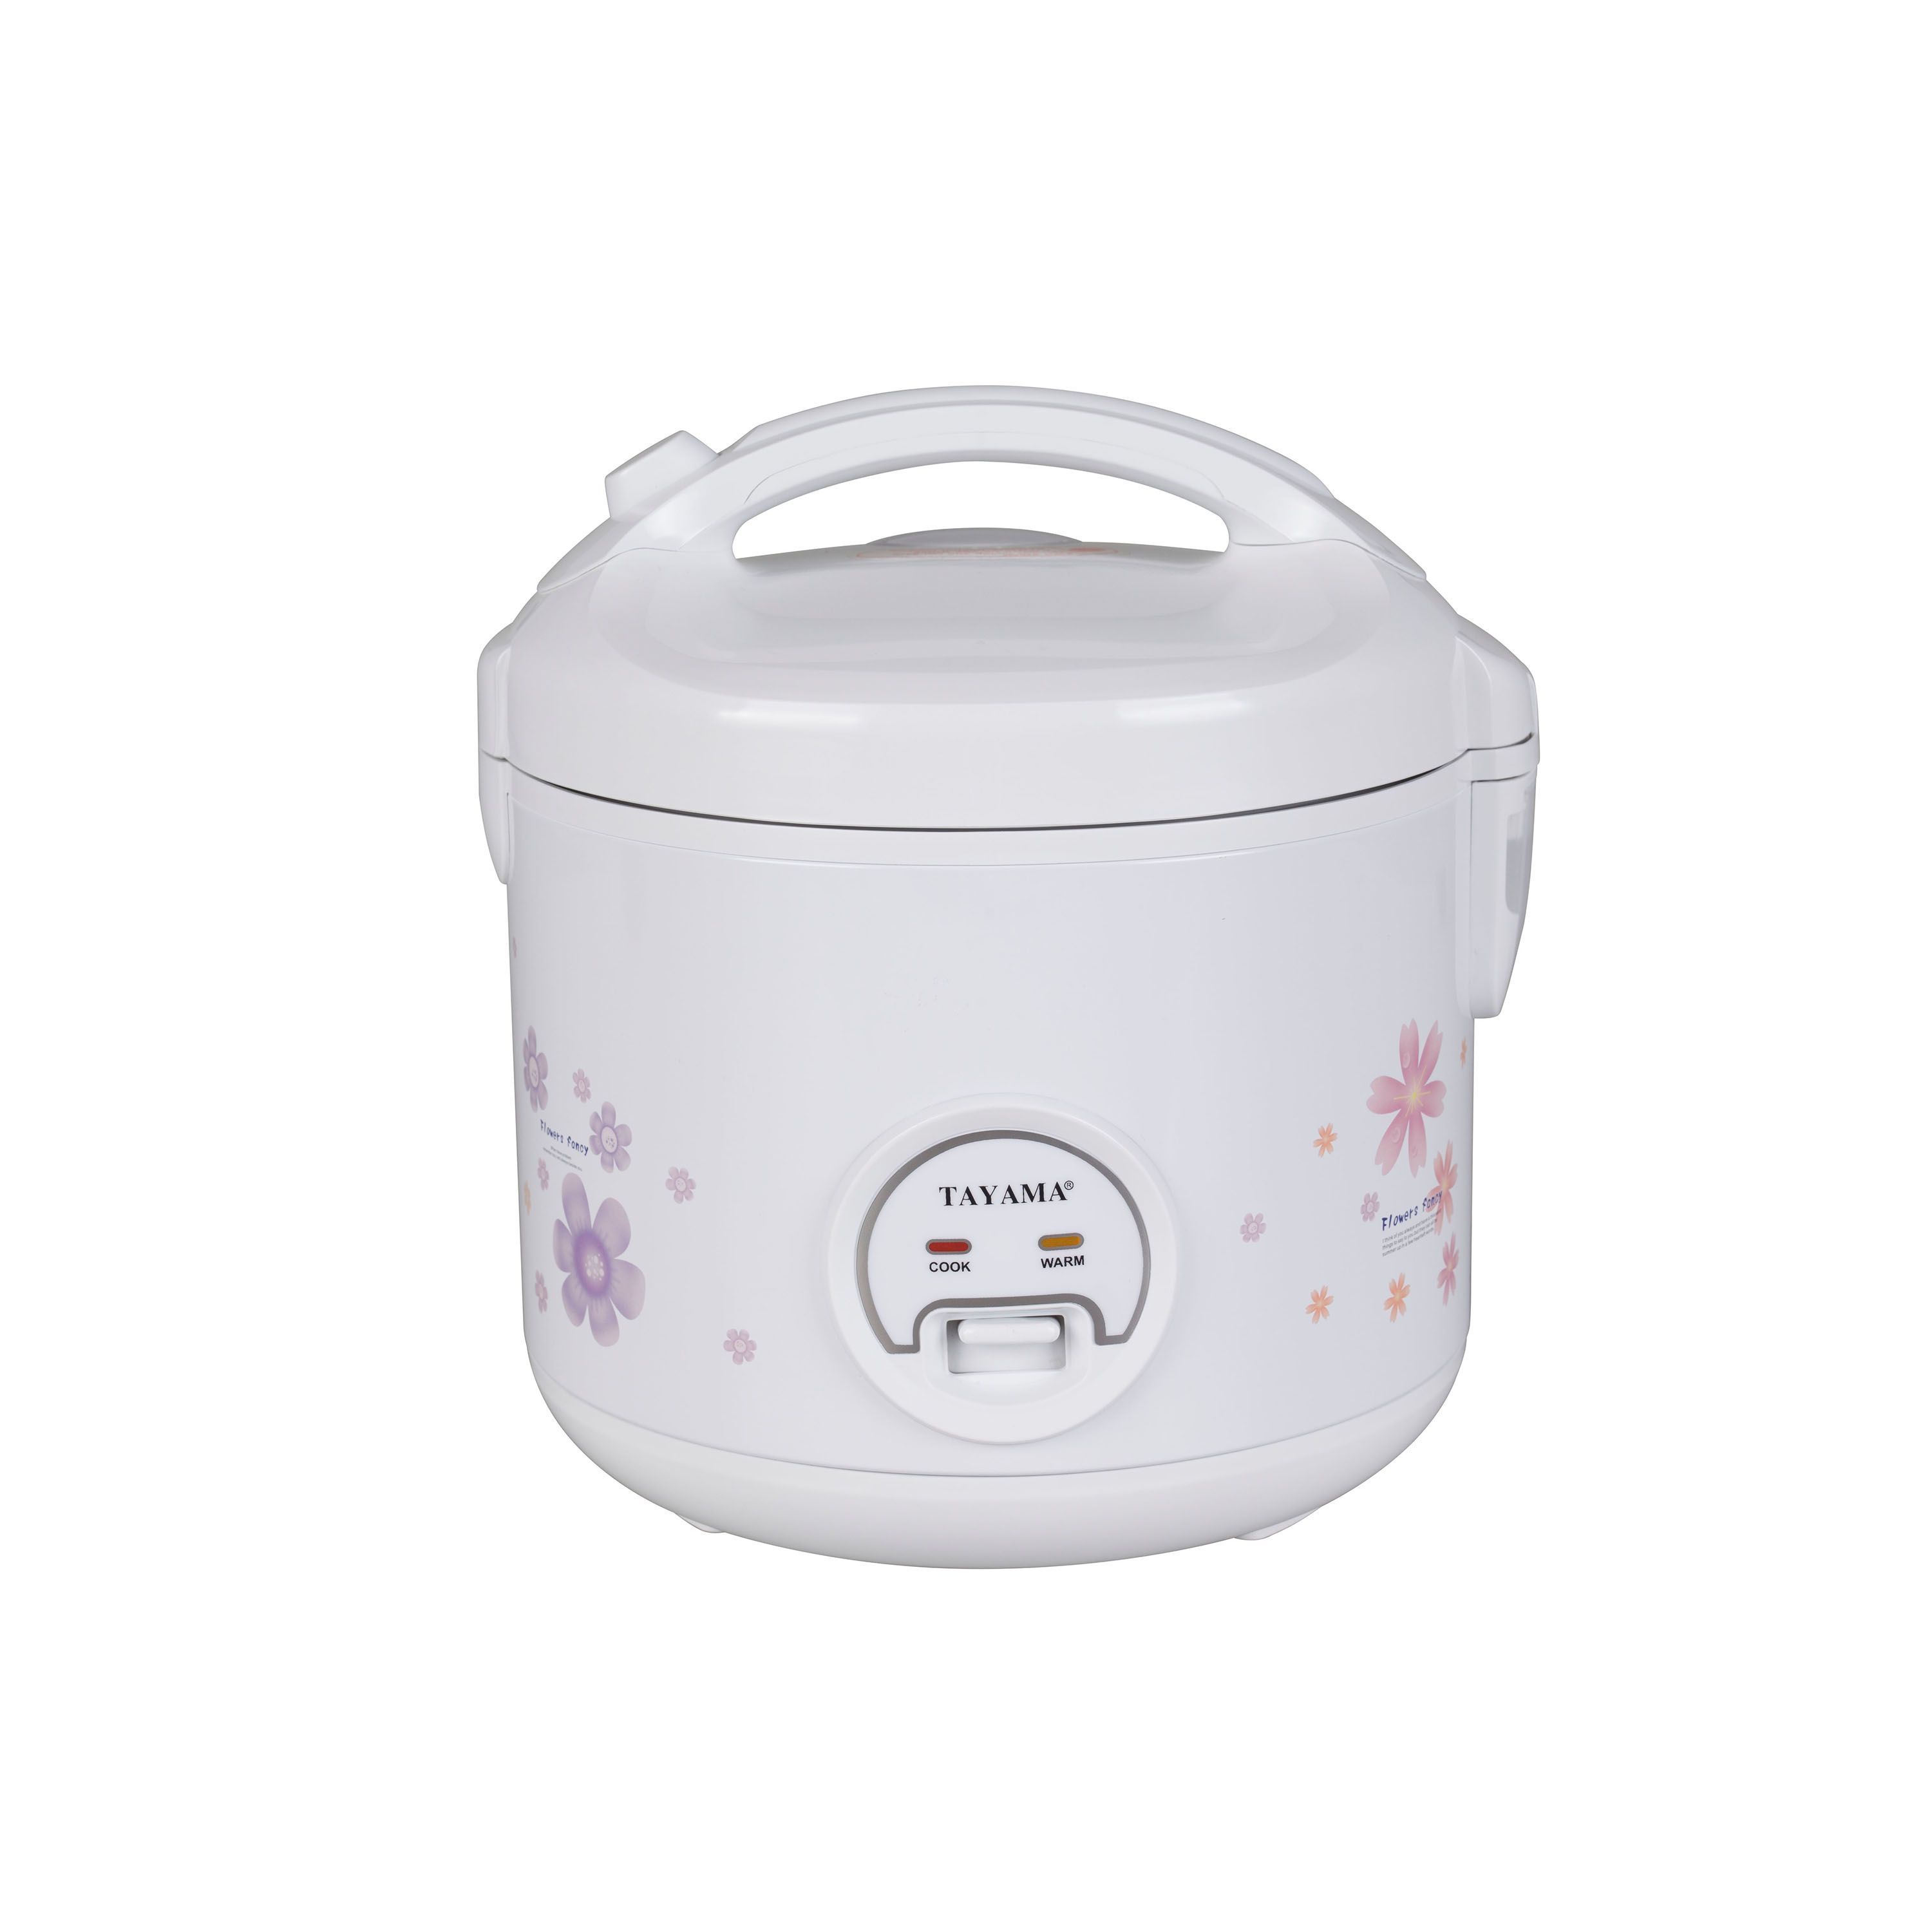 Trc-08 Cool Touch 8-cup Rice Cooker, White